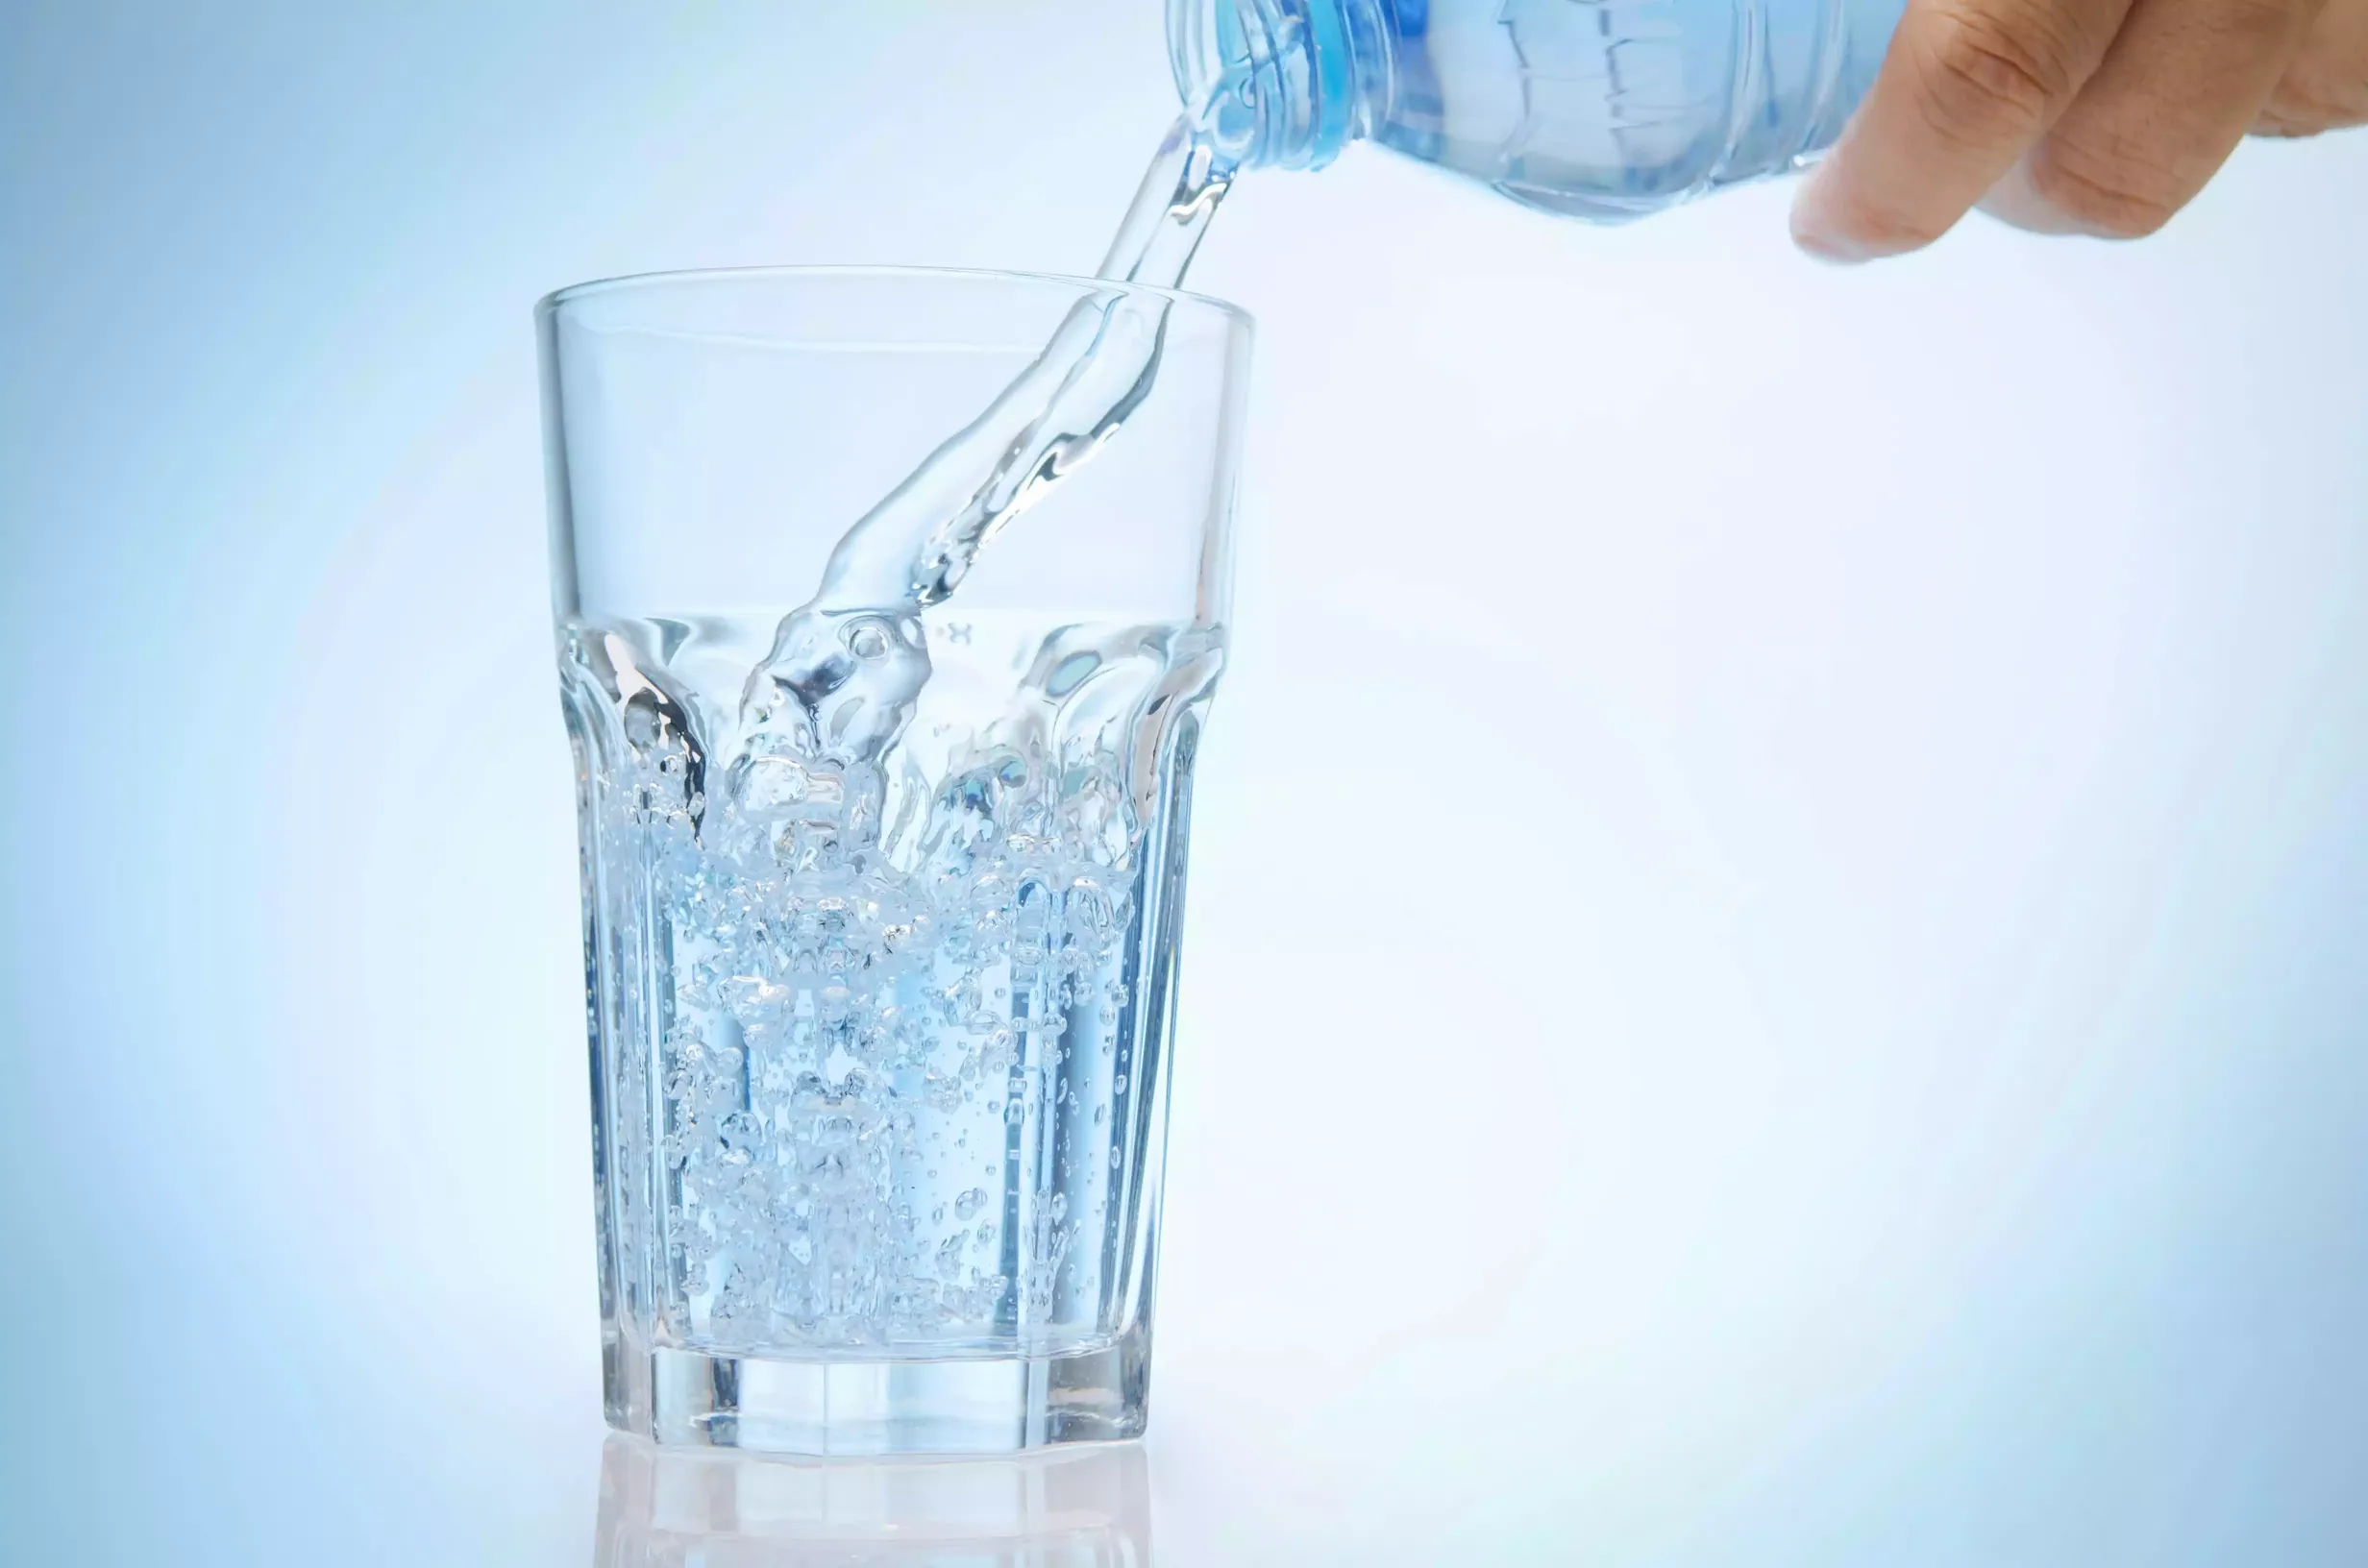 A hand pours water from a plastic bottle into a clear glass, with water splashing and bubbles forming—refreshing relief for those experiencing dry mouth.